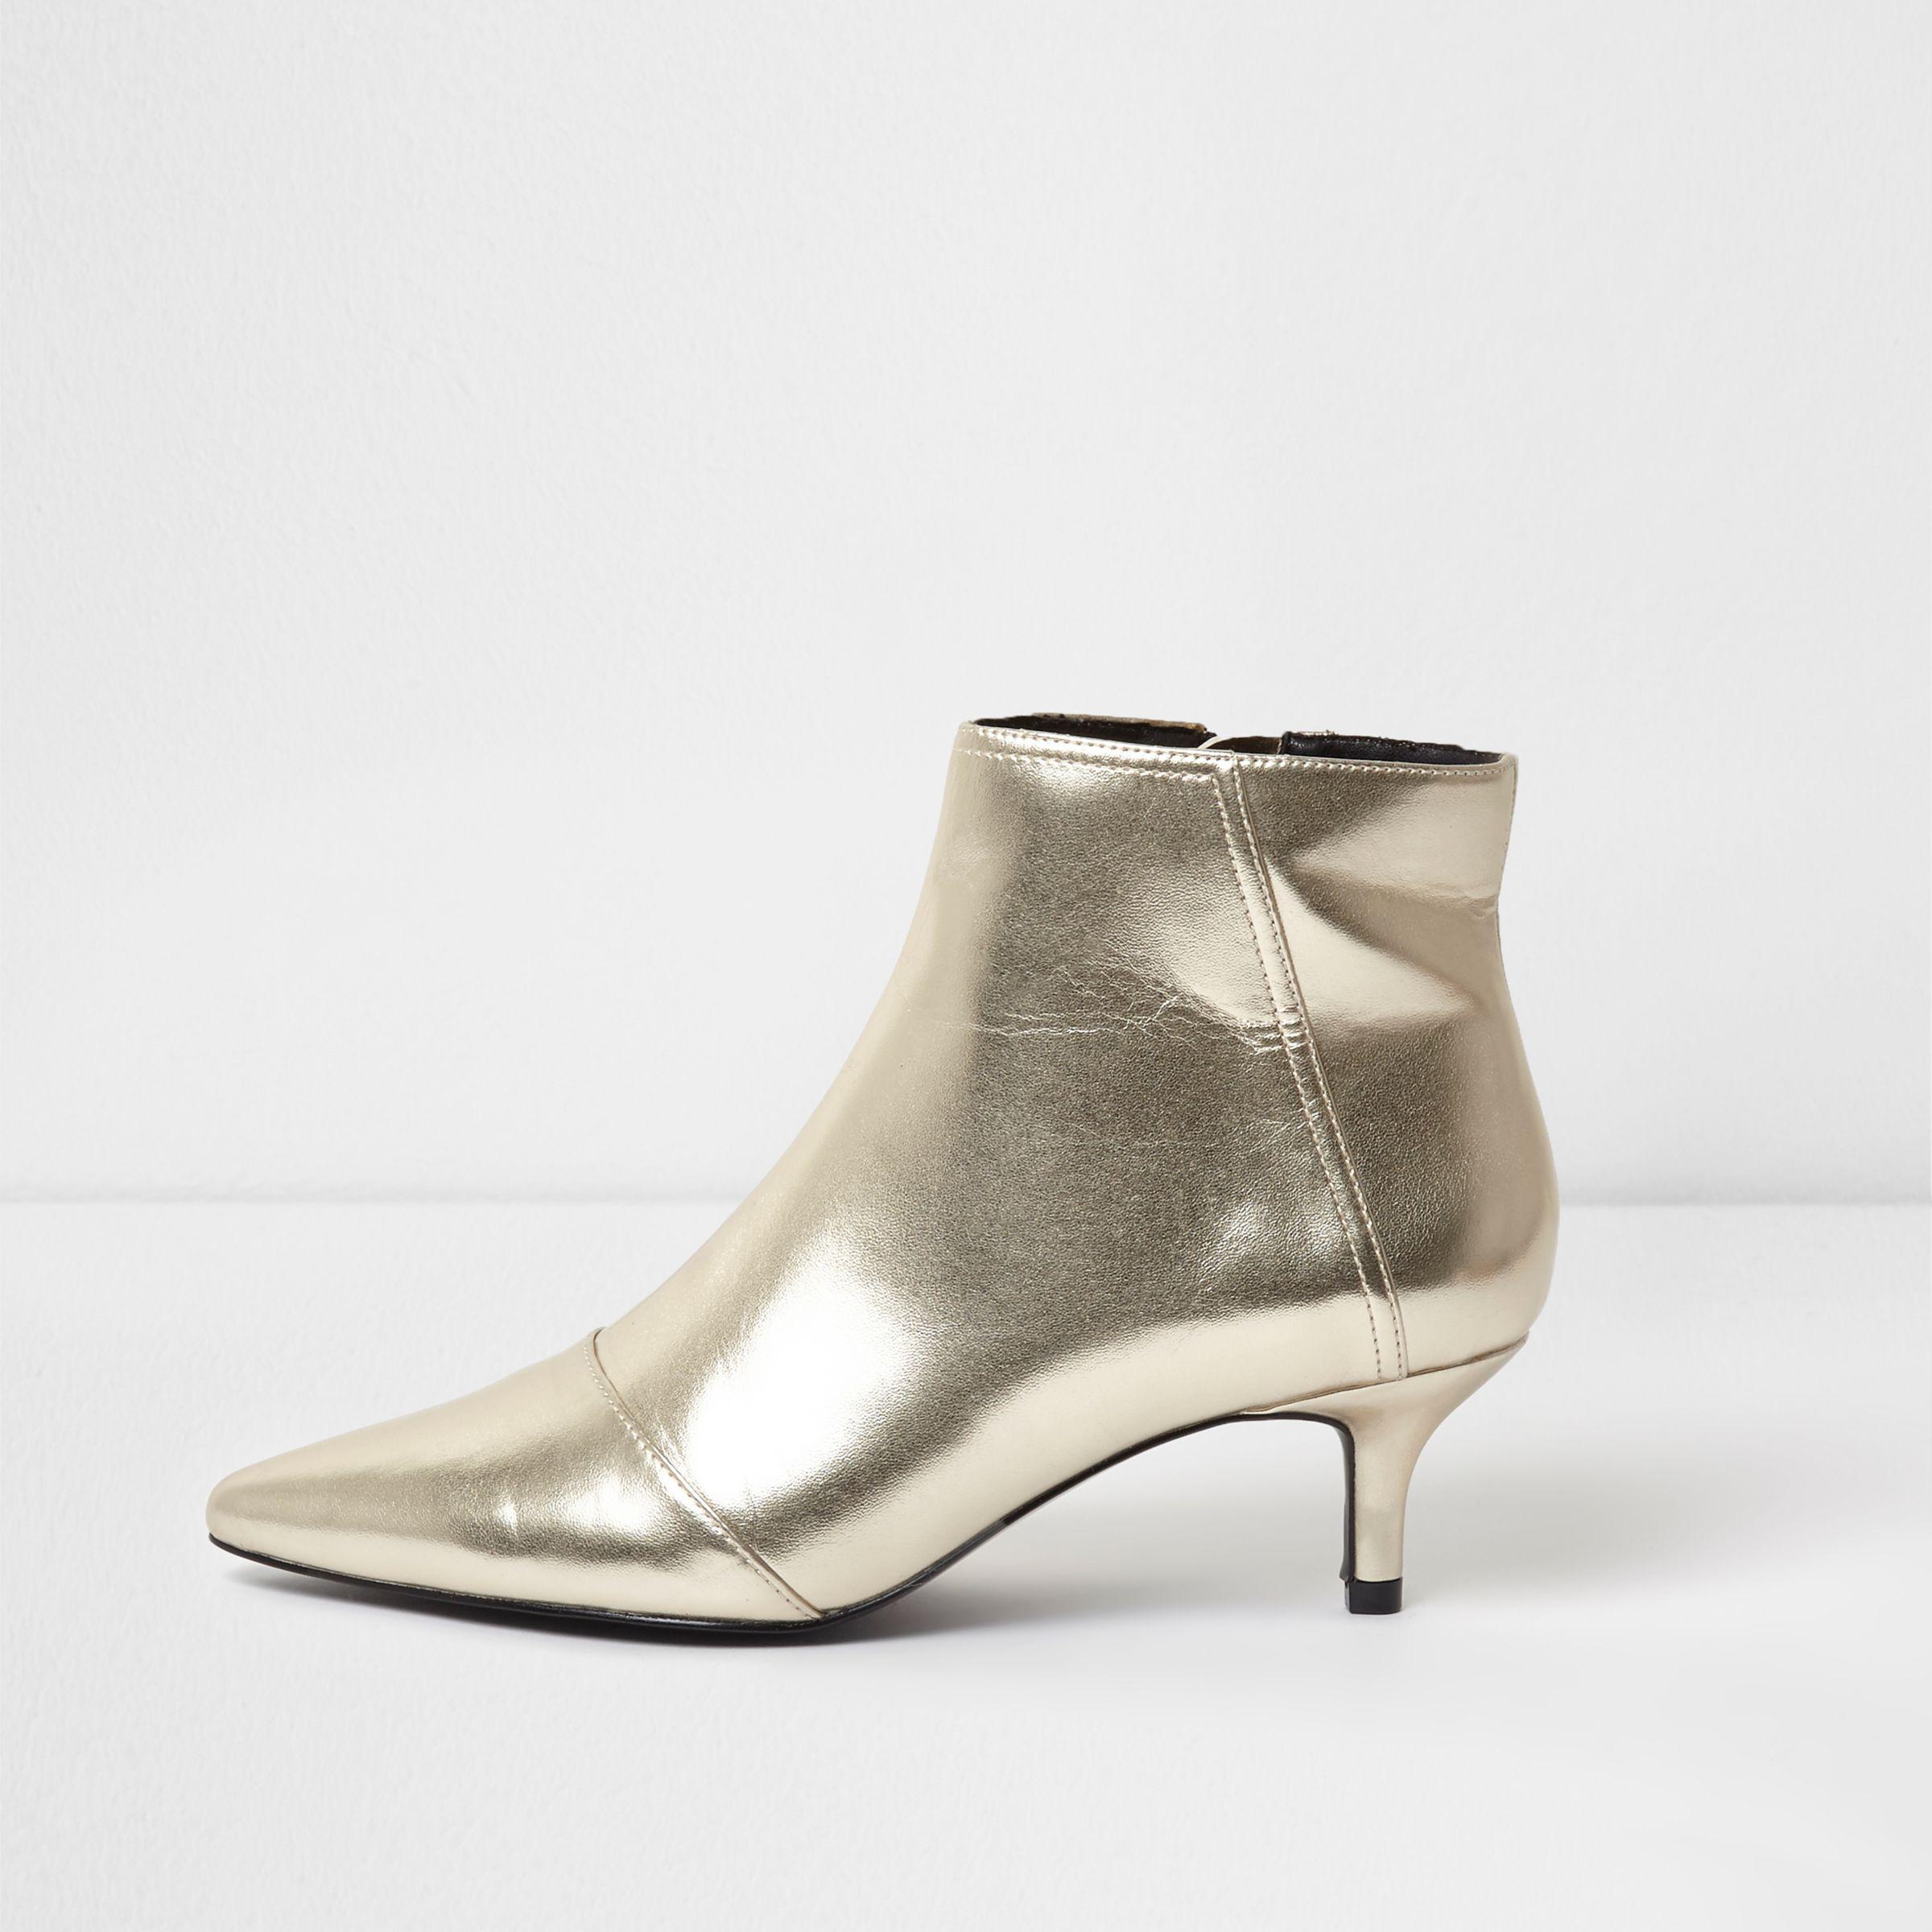 River Island Gold Metallic Pointed Kitten Heel Ankle Boots | Lyst